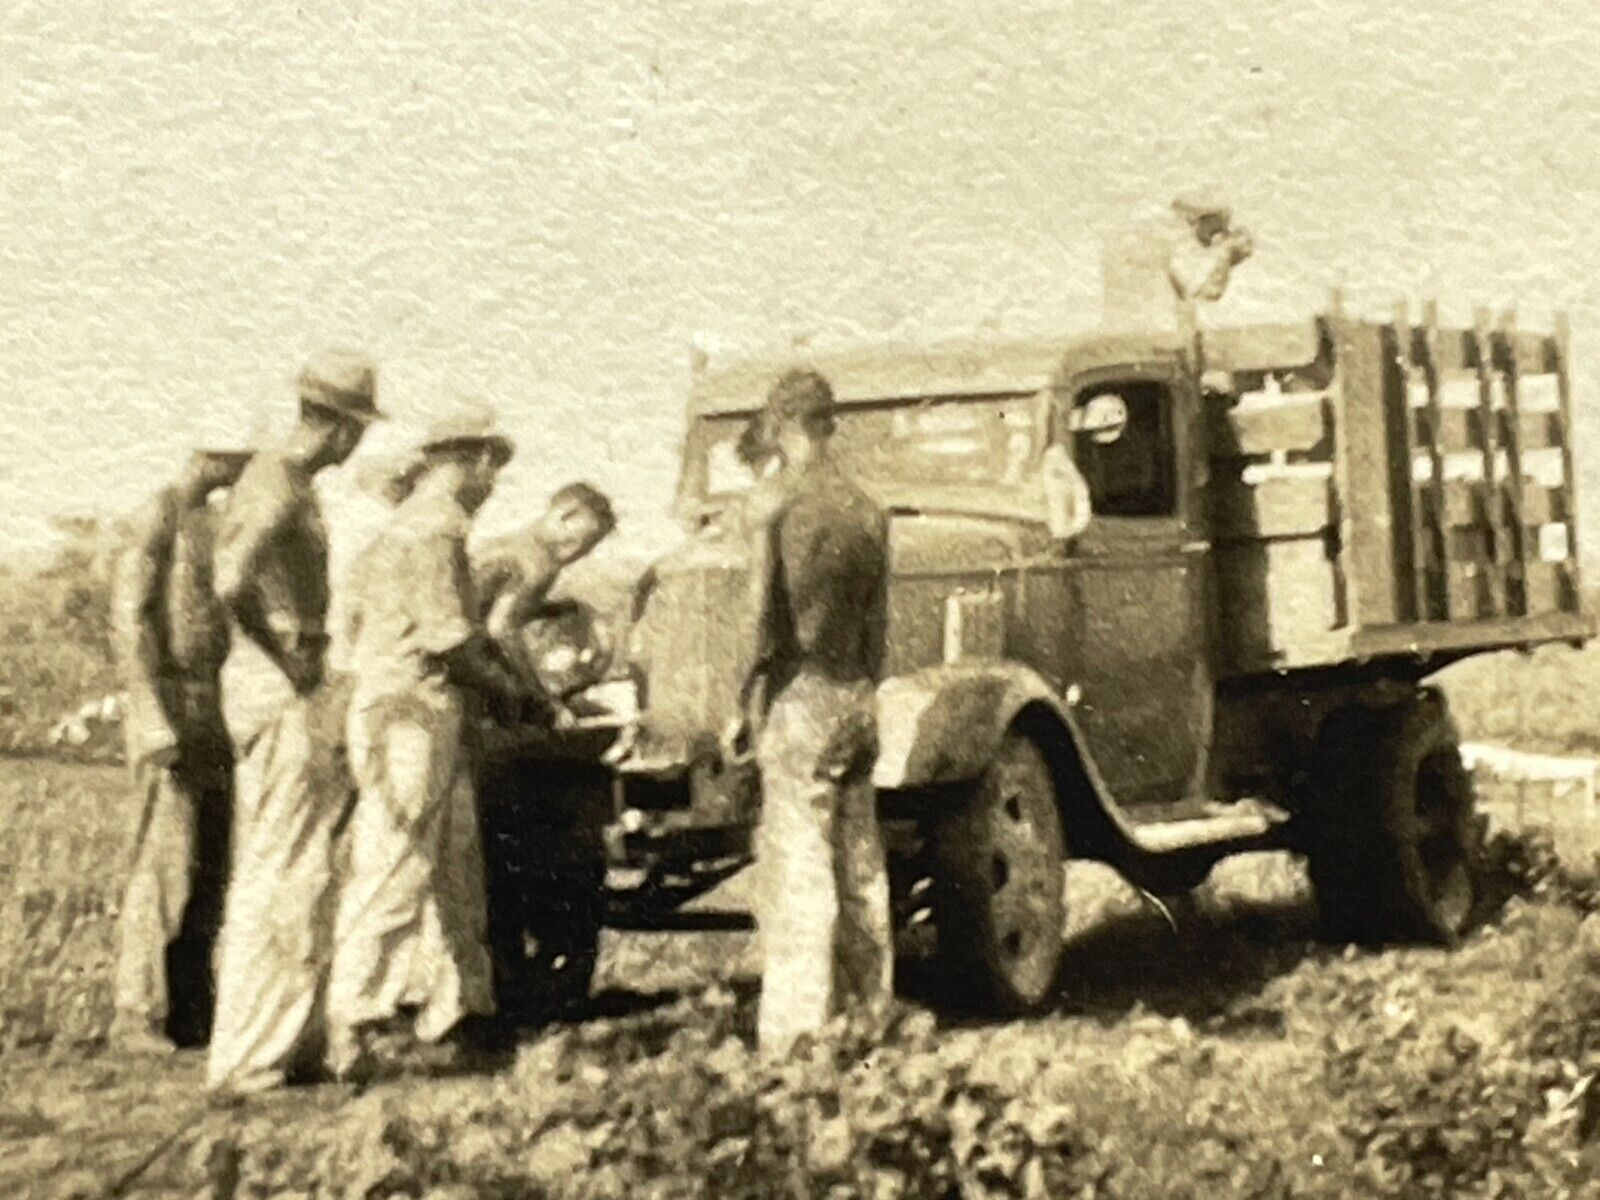 W7 Photograph Handsome Men Working On Old Truck In Field Shirtless Worker 1930's